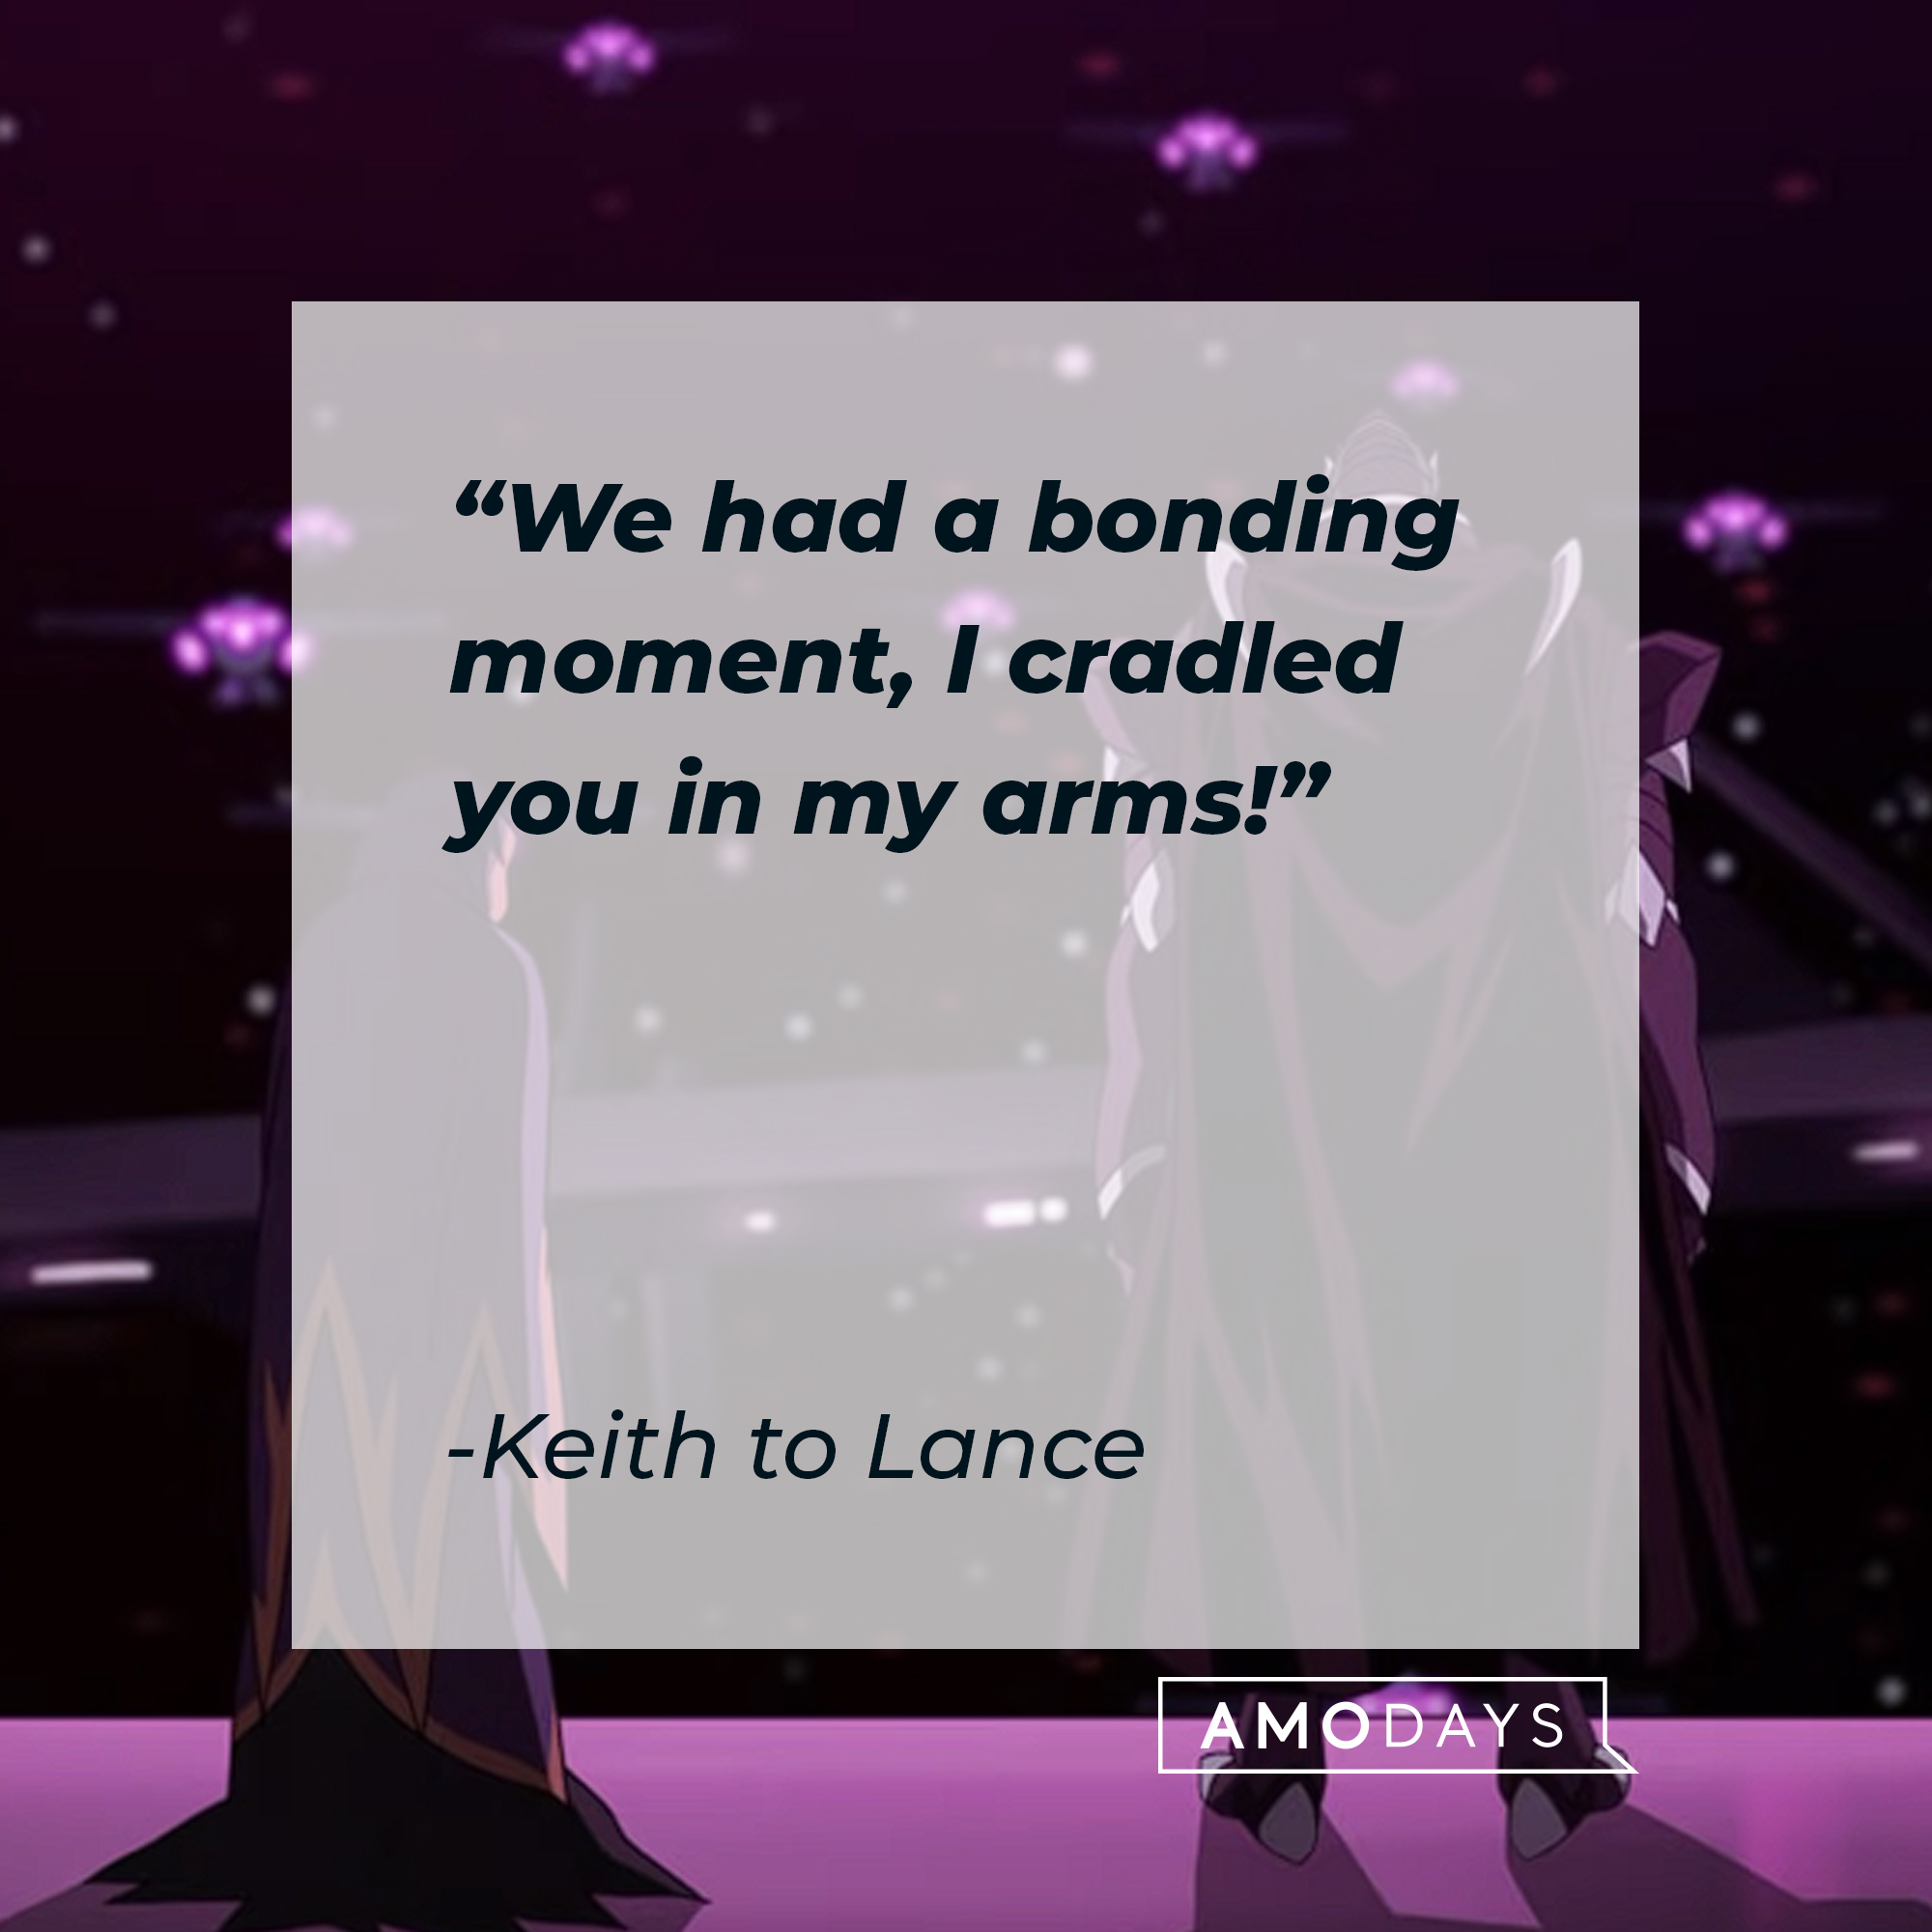 Keith's quote to Lance: "We had a bonding moment, I cradled you in my arms!" | Source: youtube.com/netflixafterschool